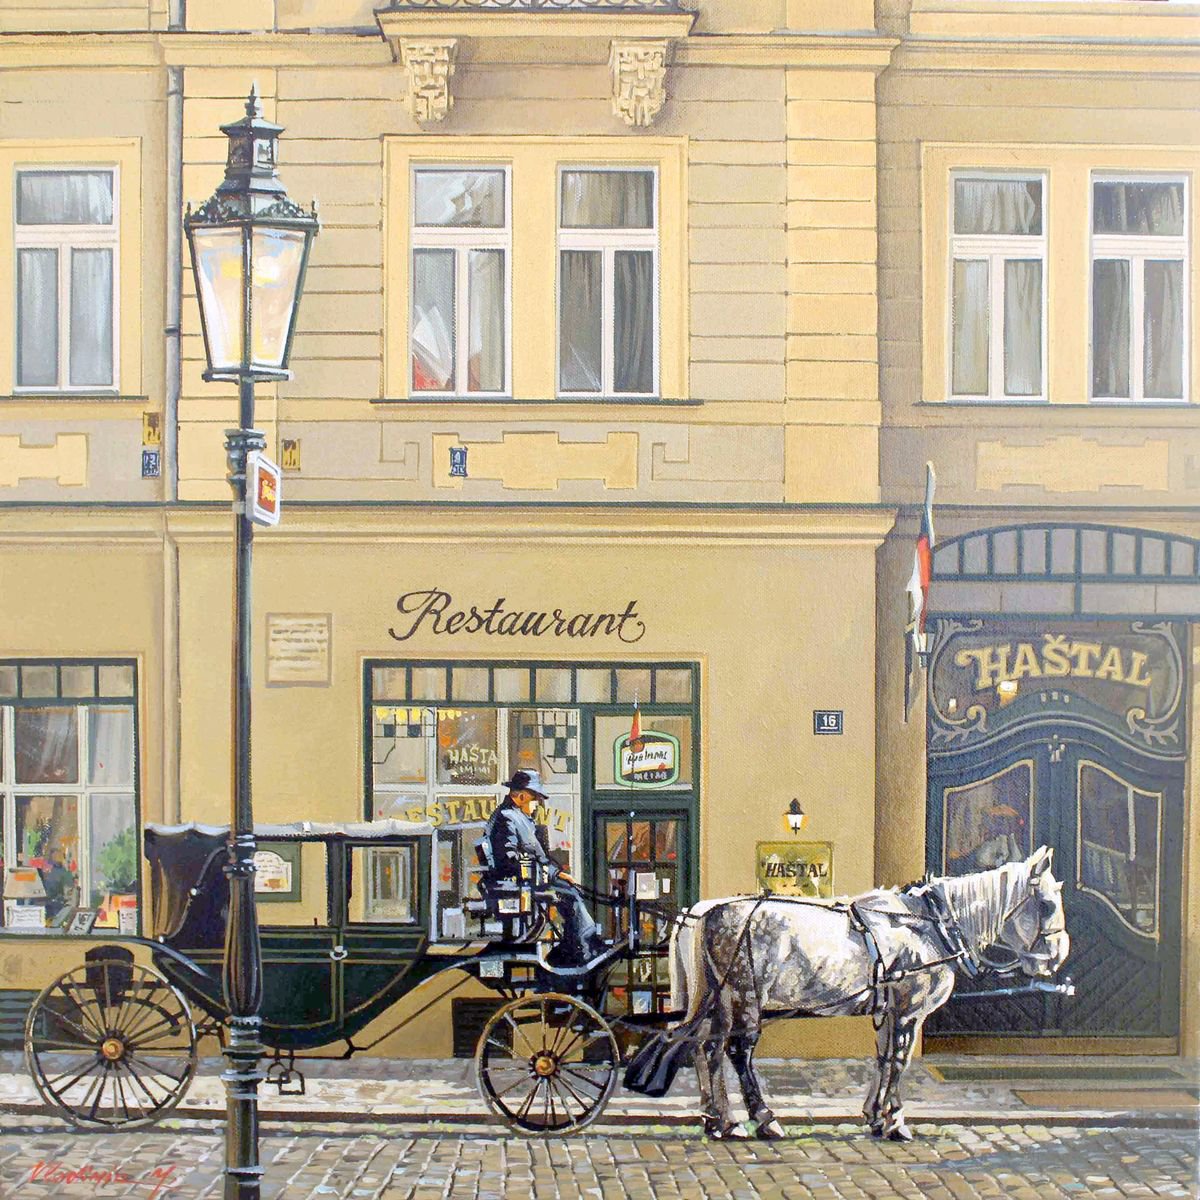 The carriage is served by Volodymyr Melnychuk